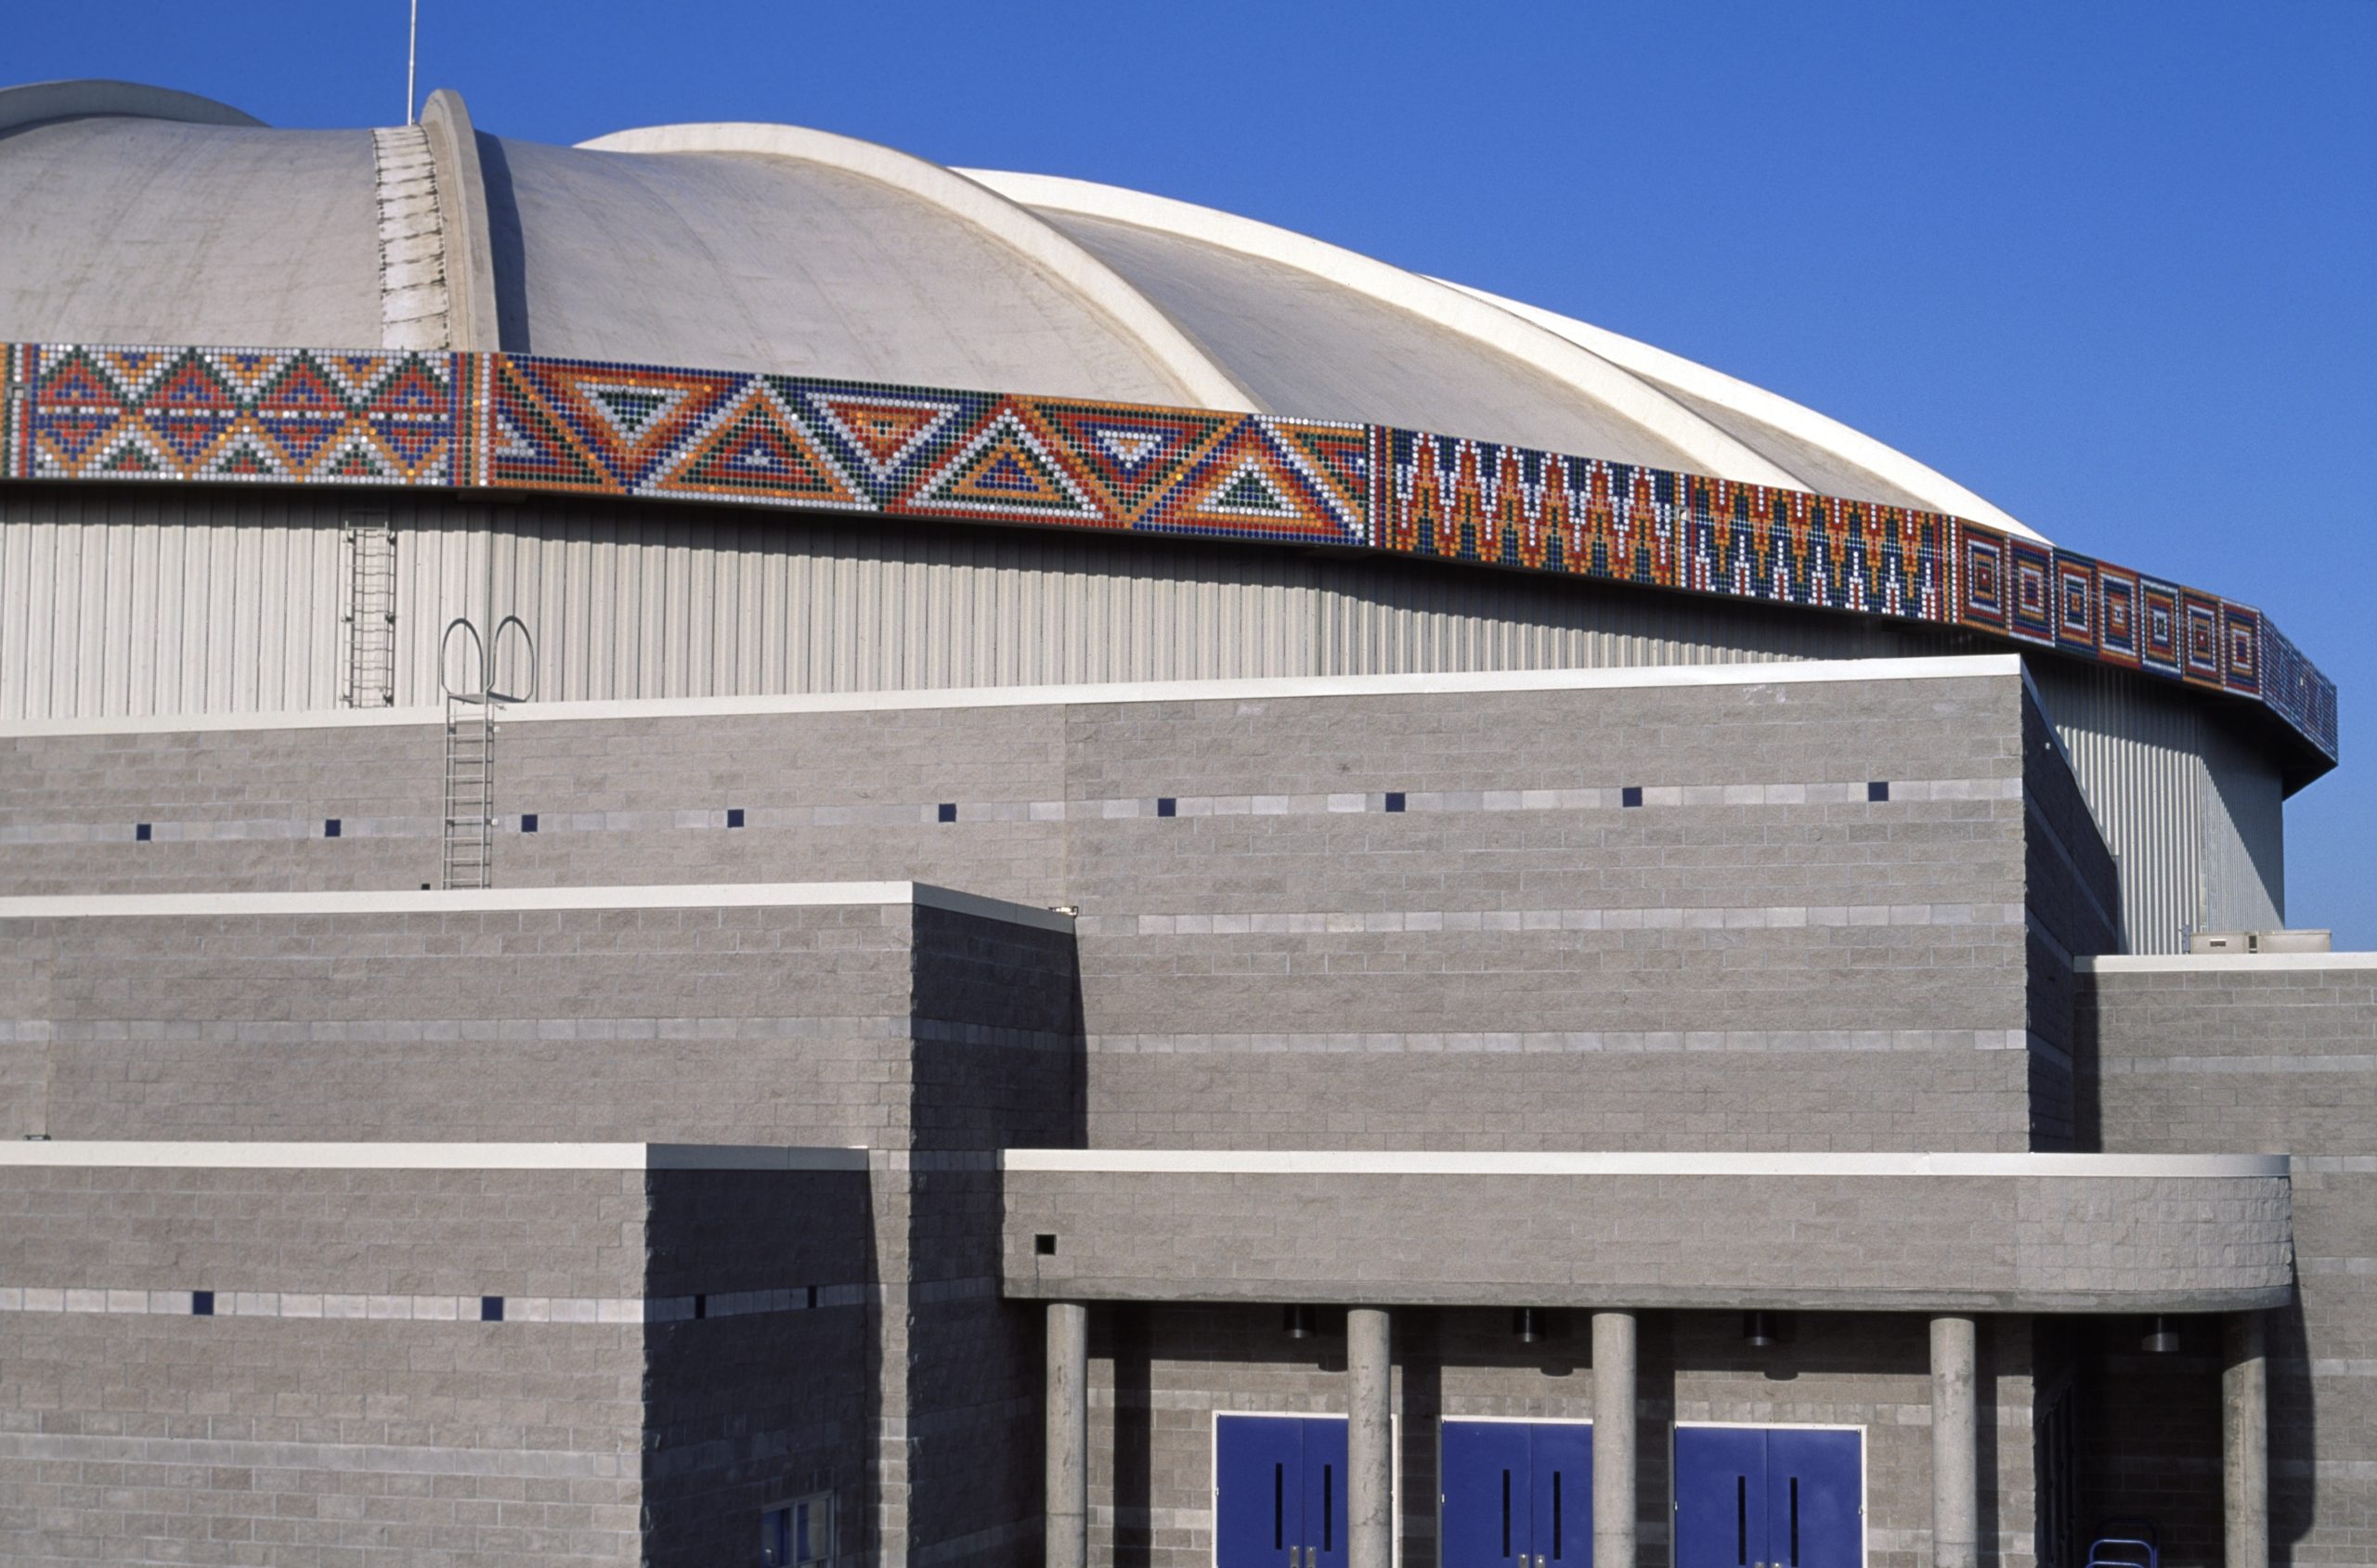 Partial view of a band of geometric patterns made of thousands of 3-inch industrial highway reflectors that encircle the roof of a large concrete building. There is a very blue sky behind the SunDome building.